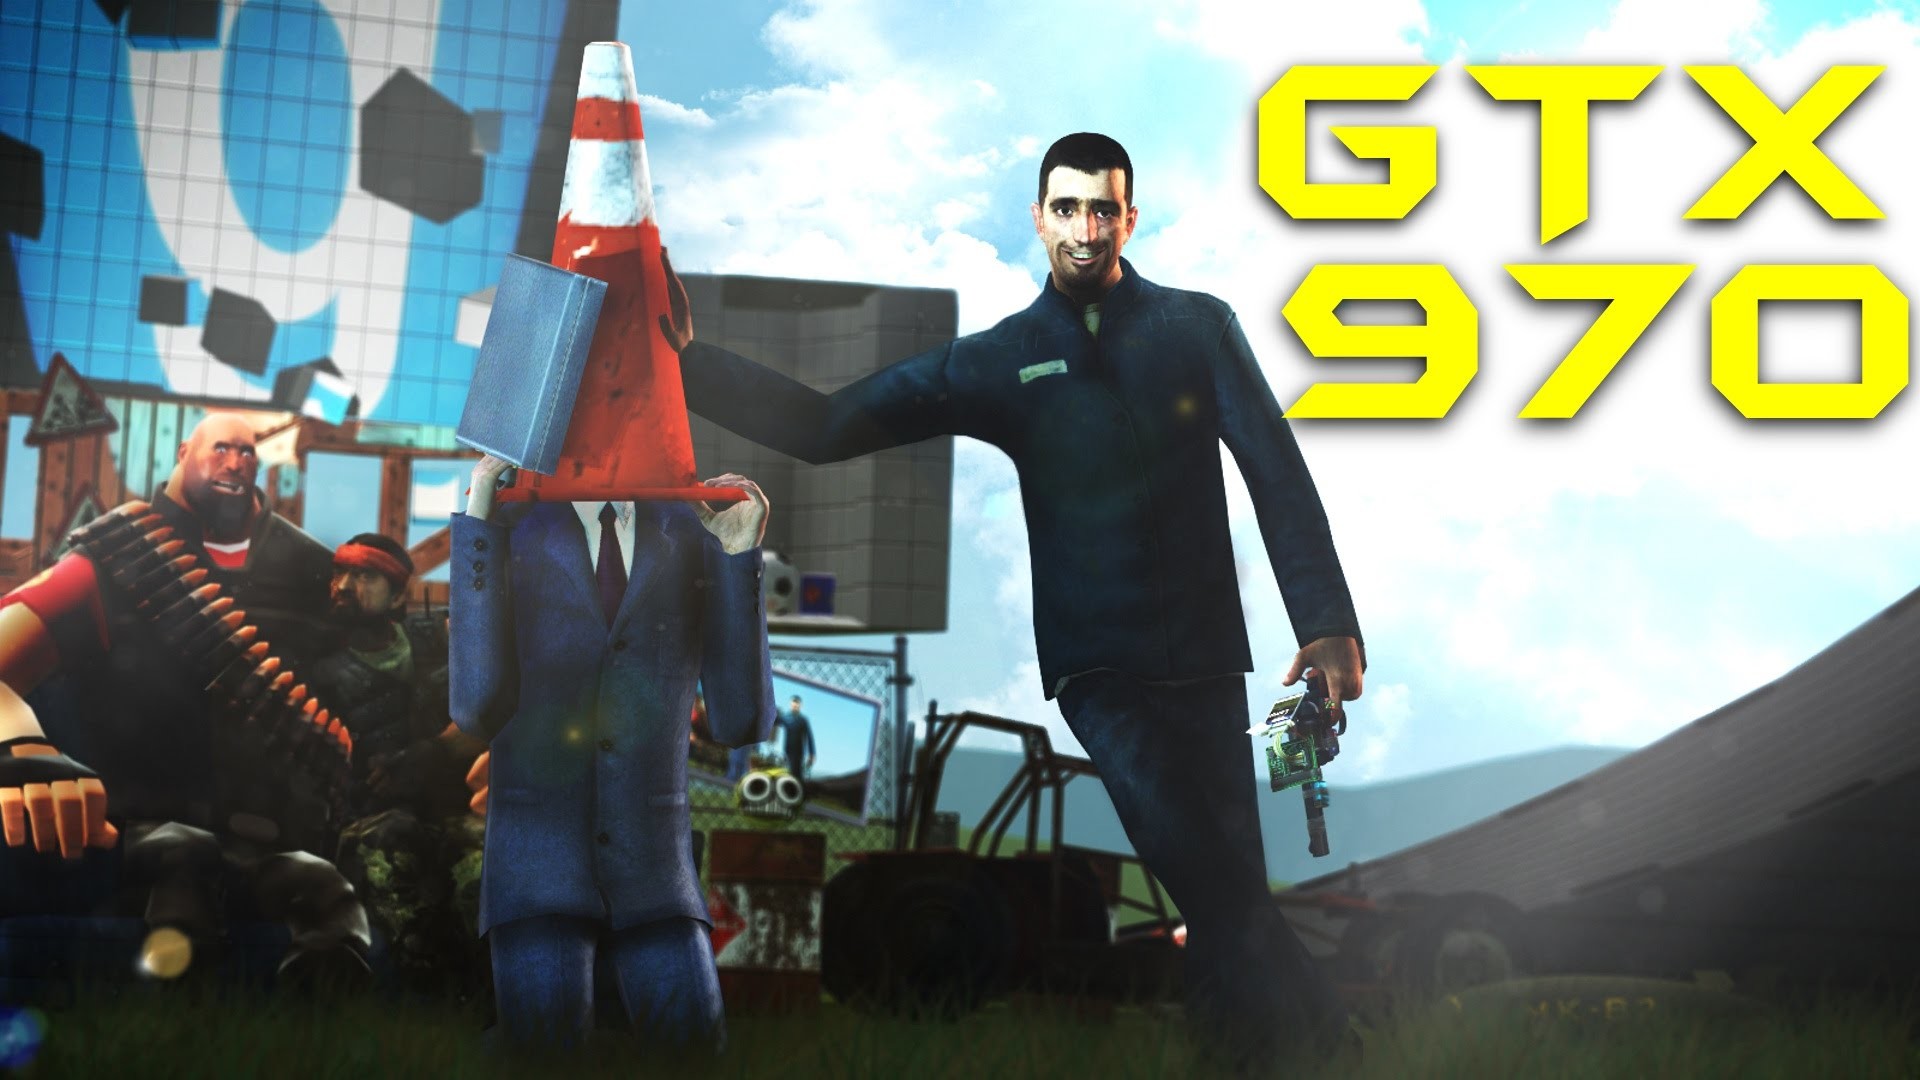 1920x1080 Garry's Mod GTX 970 OC & i5 3570k OC 4,2Ghz | 1080p Maxed Out | FRAME-RATE  TEST - YouTube